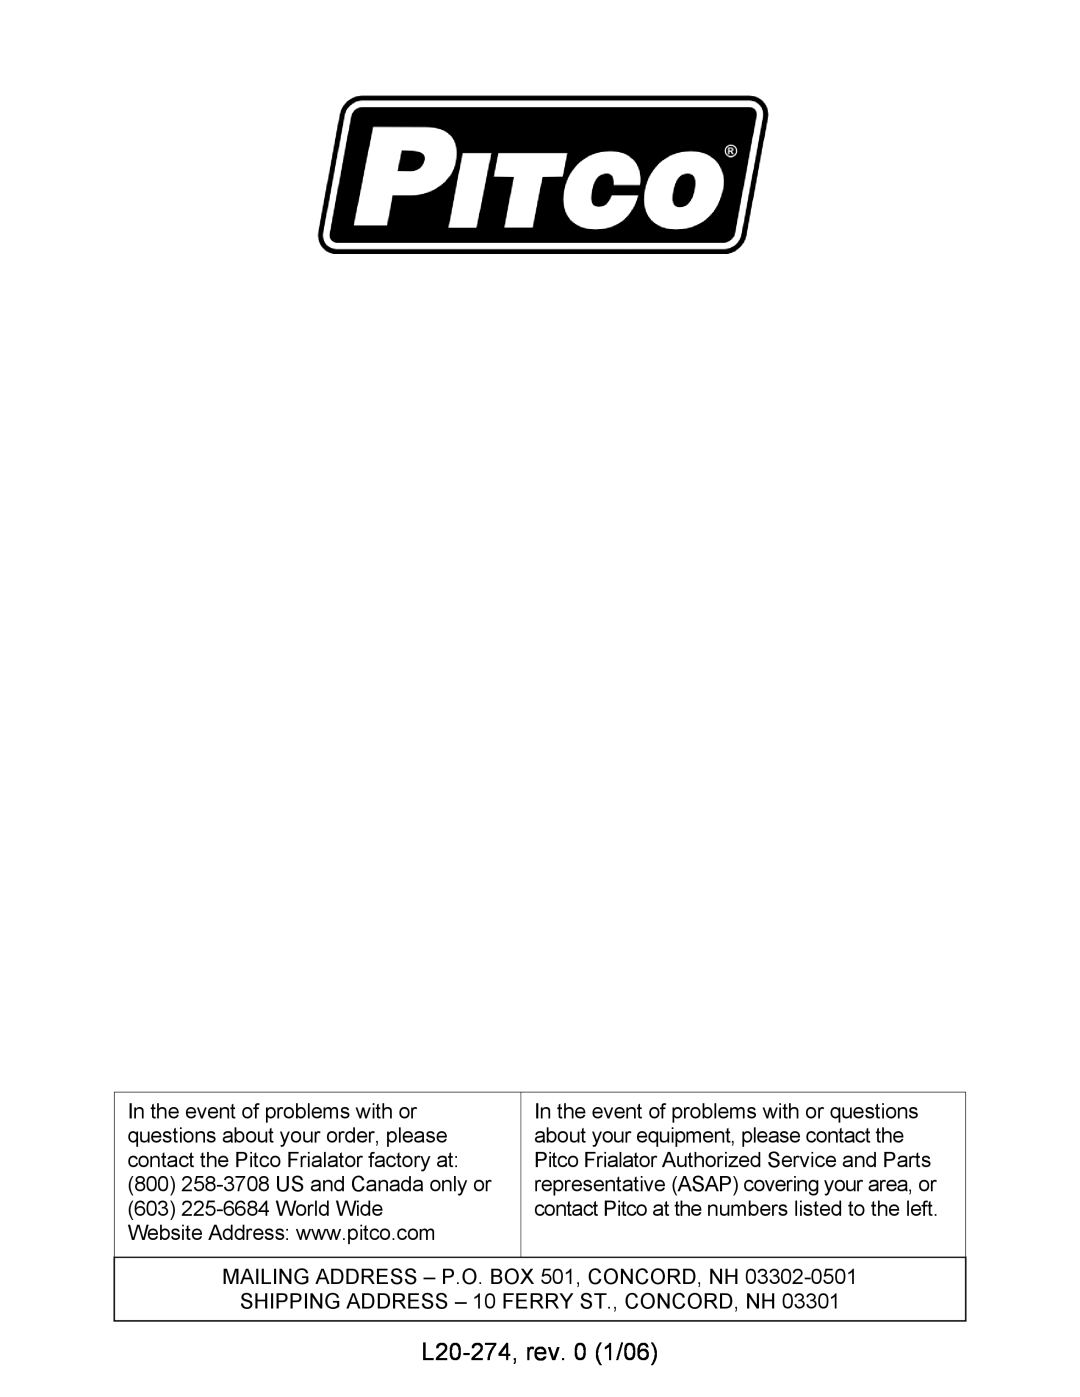 Pitco Frialator RSCPE14 operation manual L20-274,rev. 0 1/06, 800258-3708US and Canada only or 